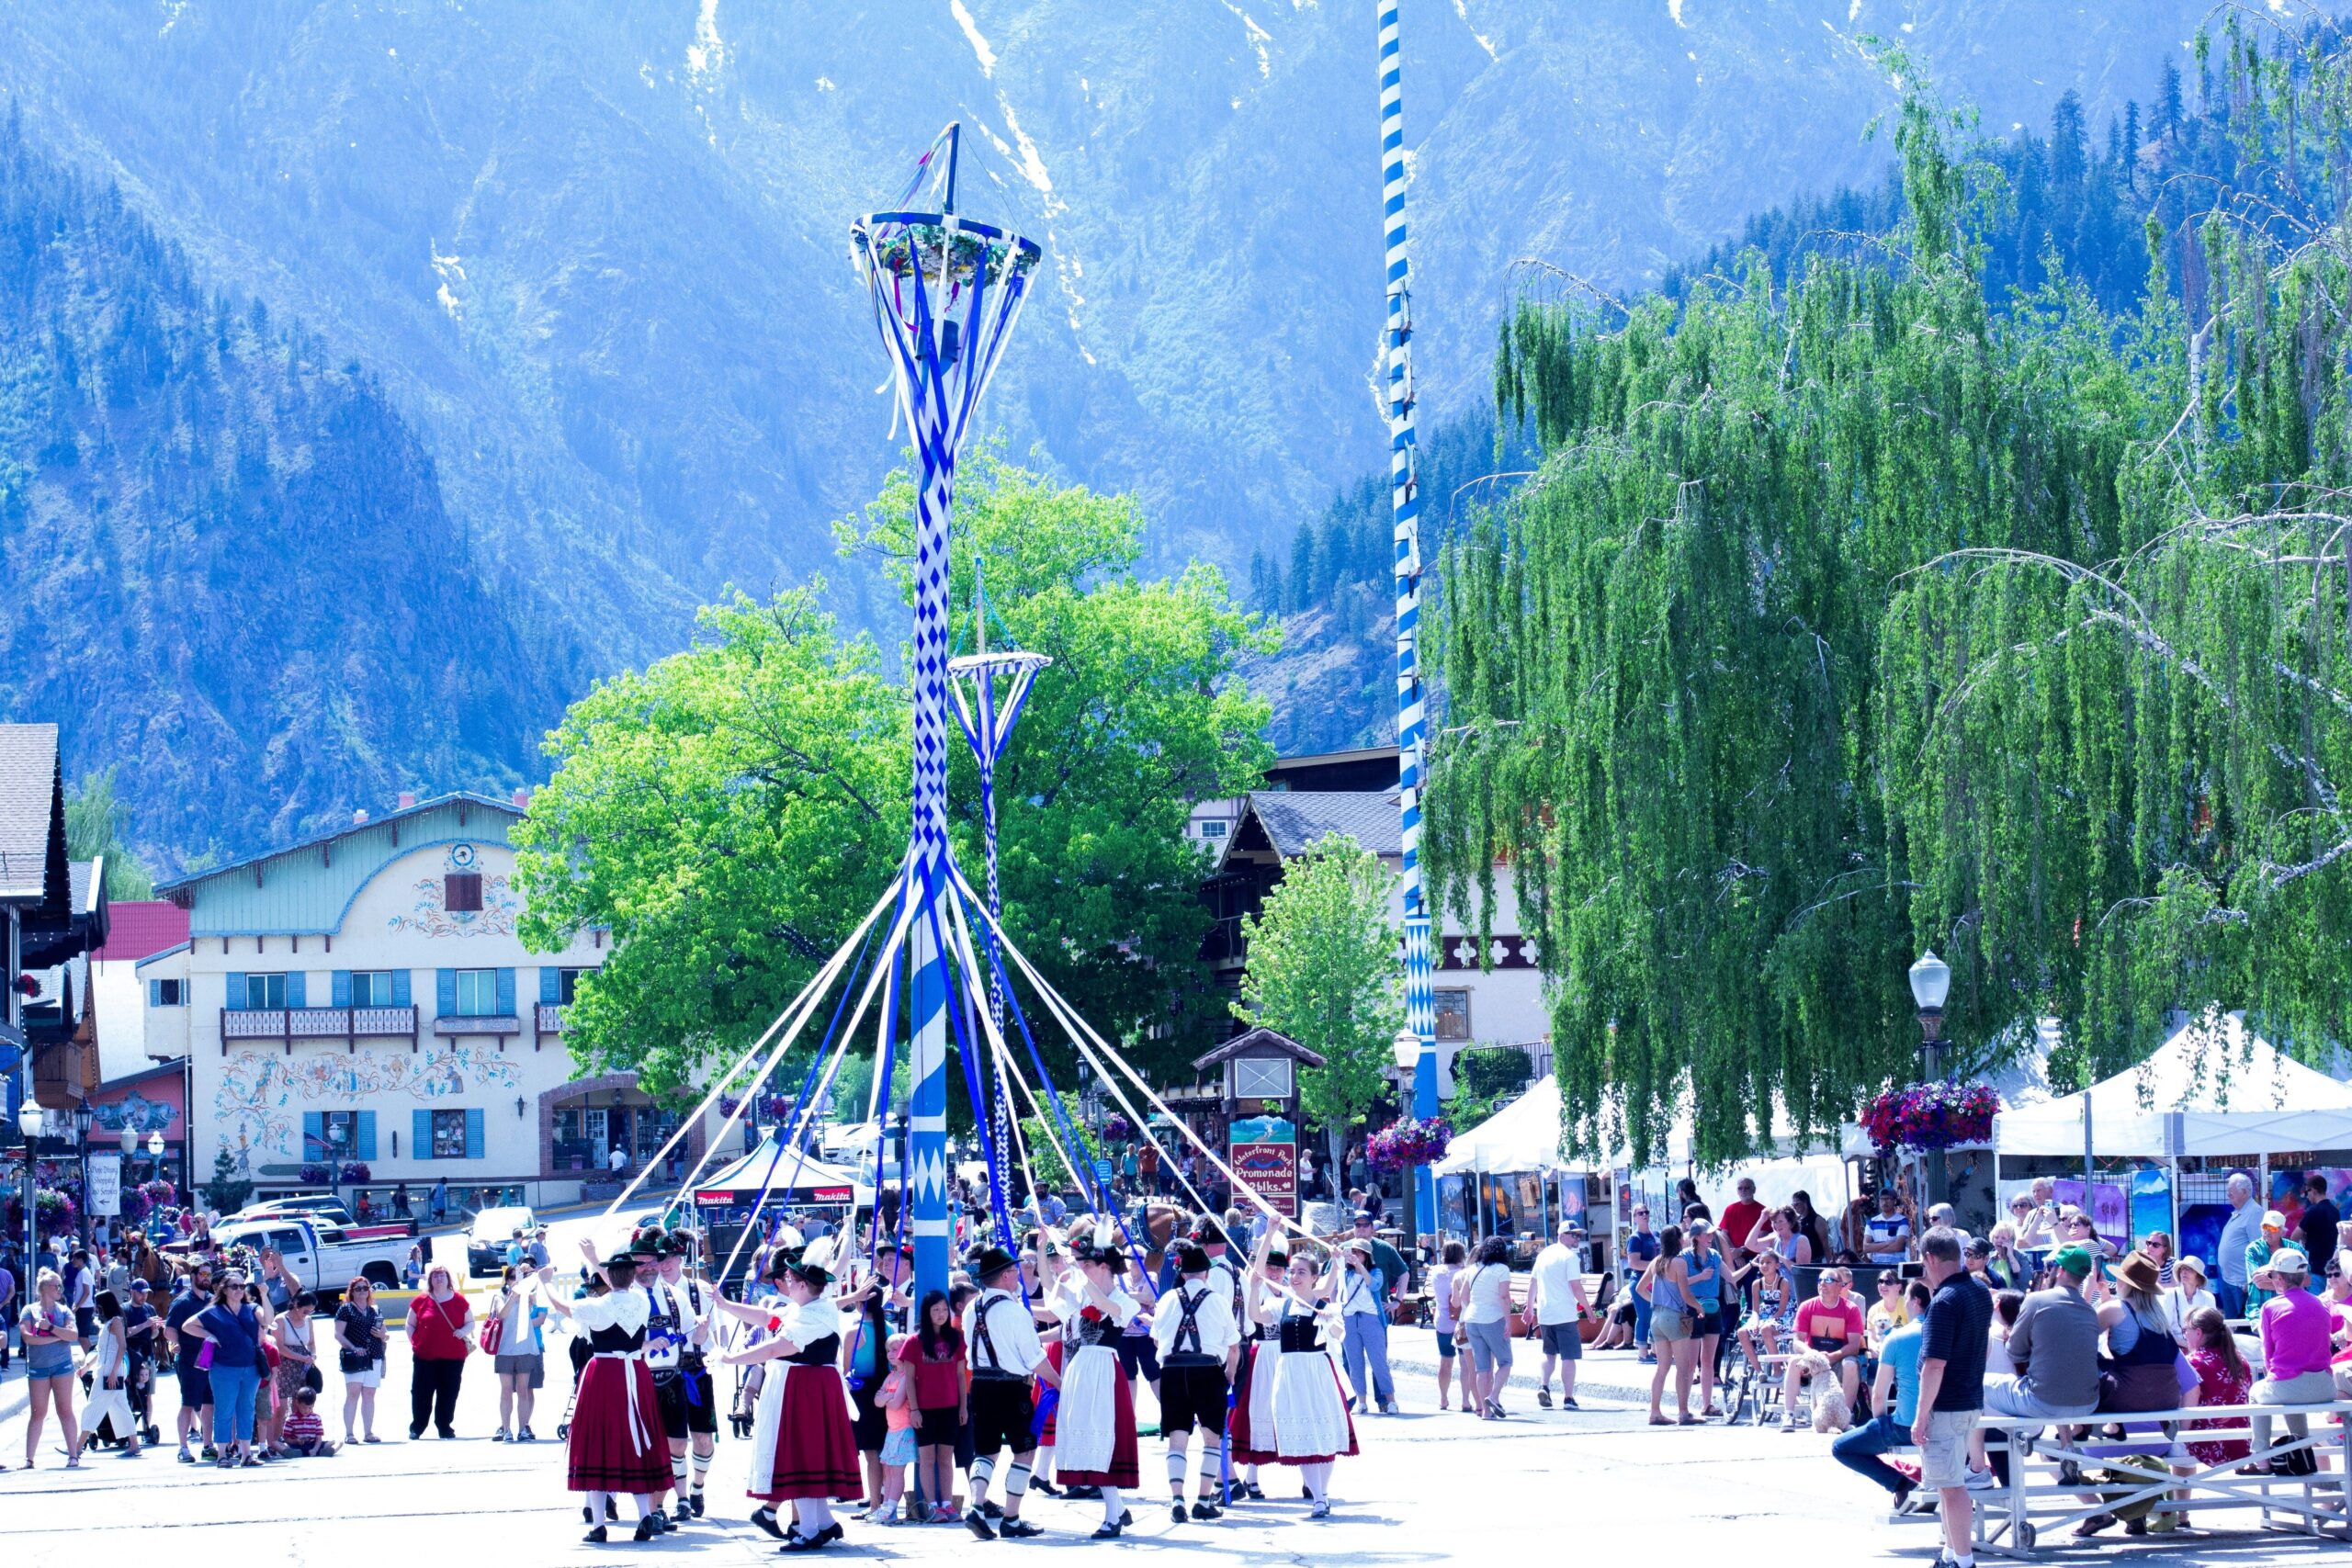 Here are the best spring events in Leavenworth, WA.